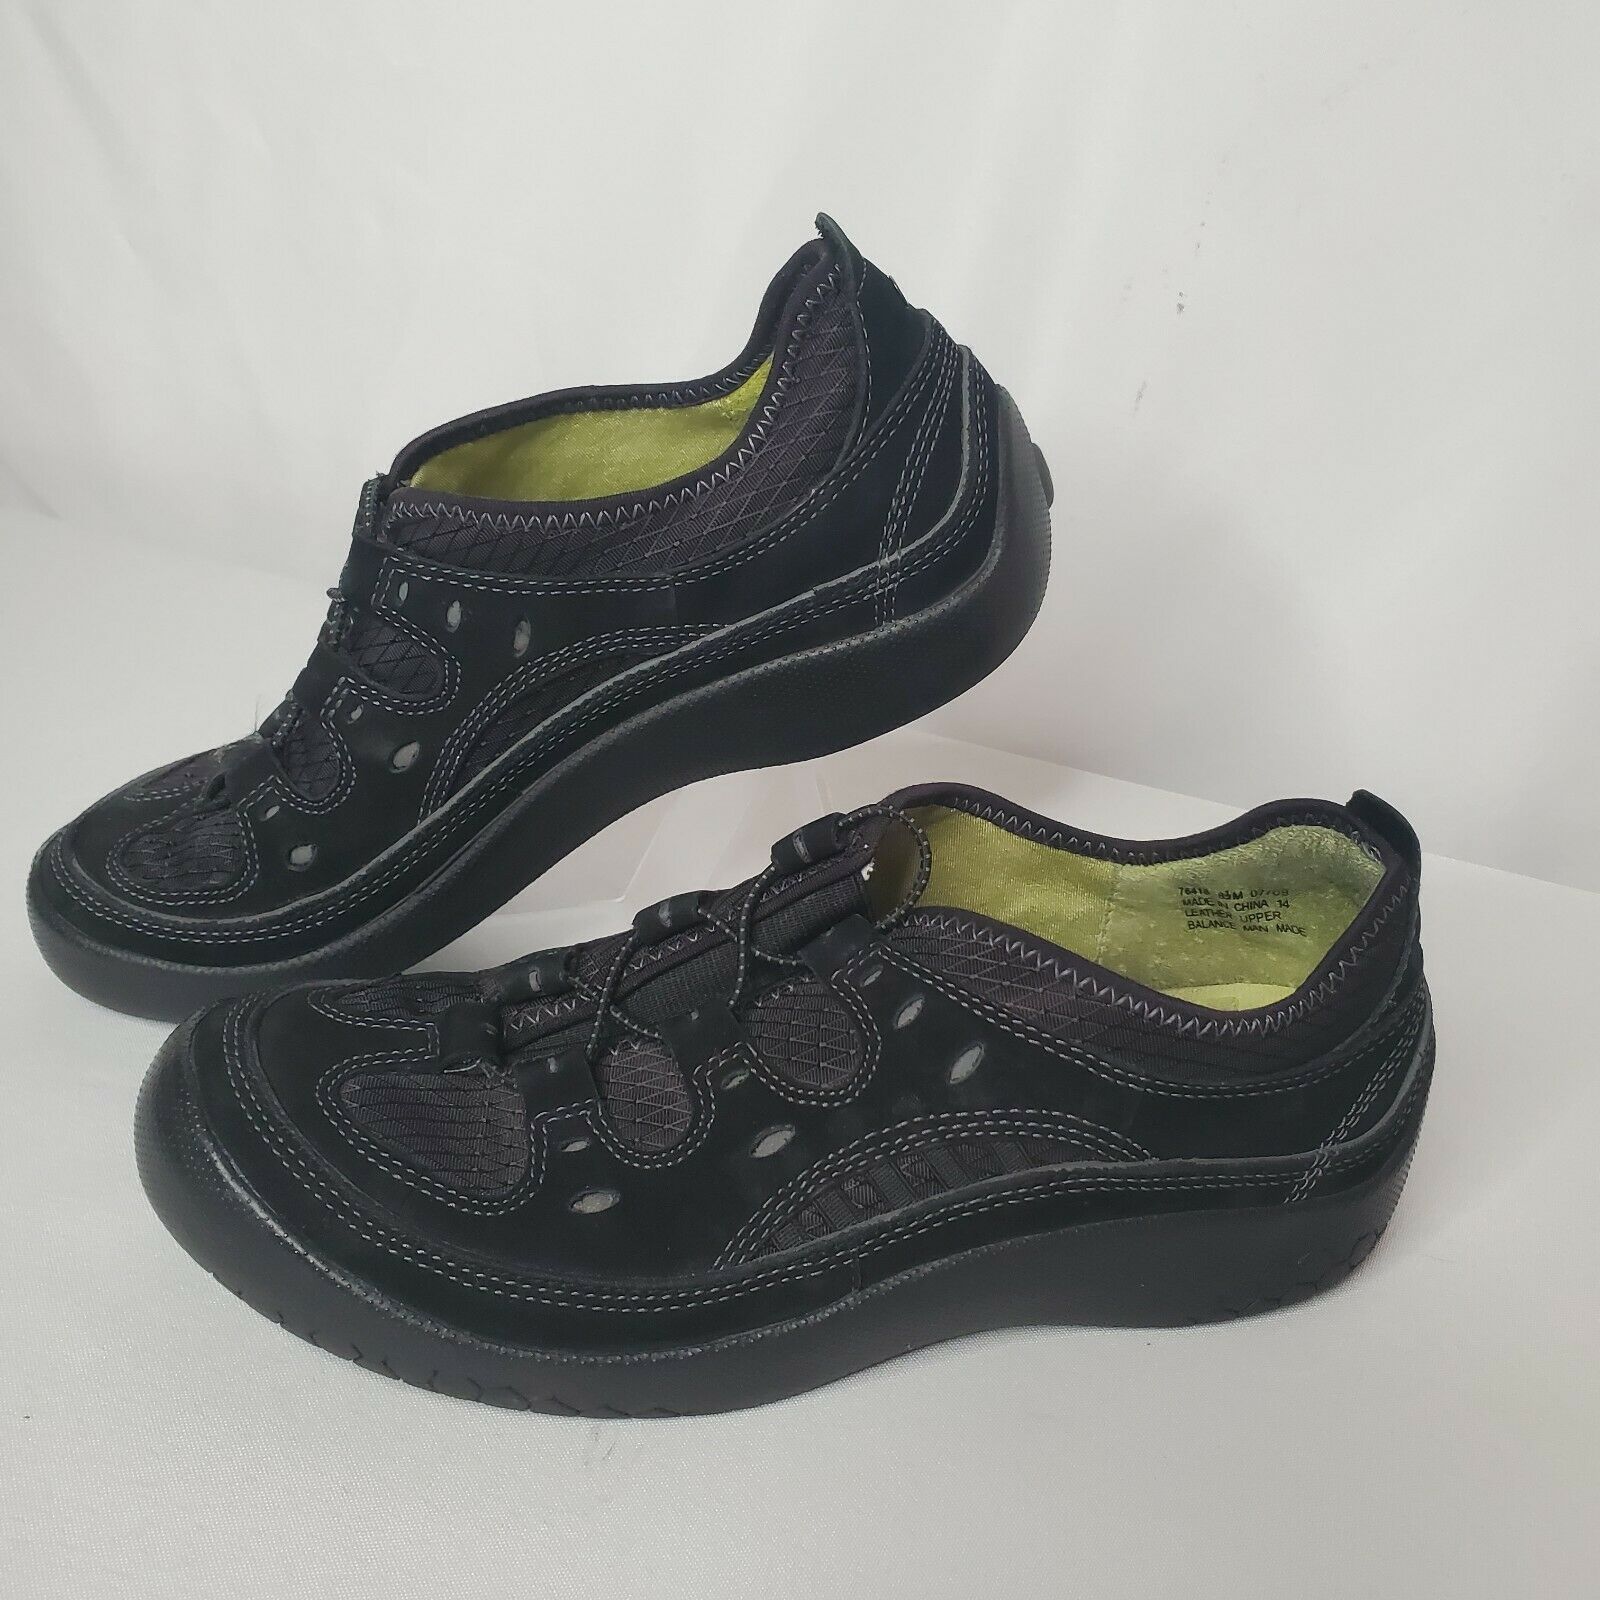 Privo by Clarks Women's Black Slip On Flat Casual Shoes Size 8.5 Preowned